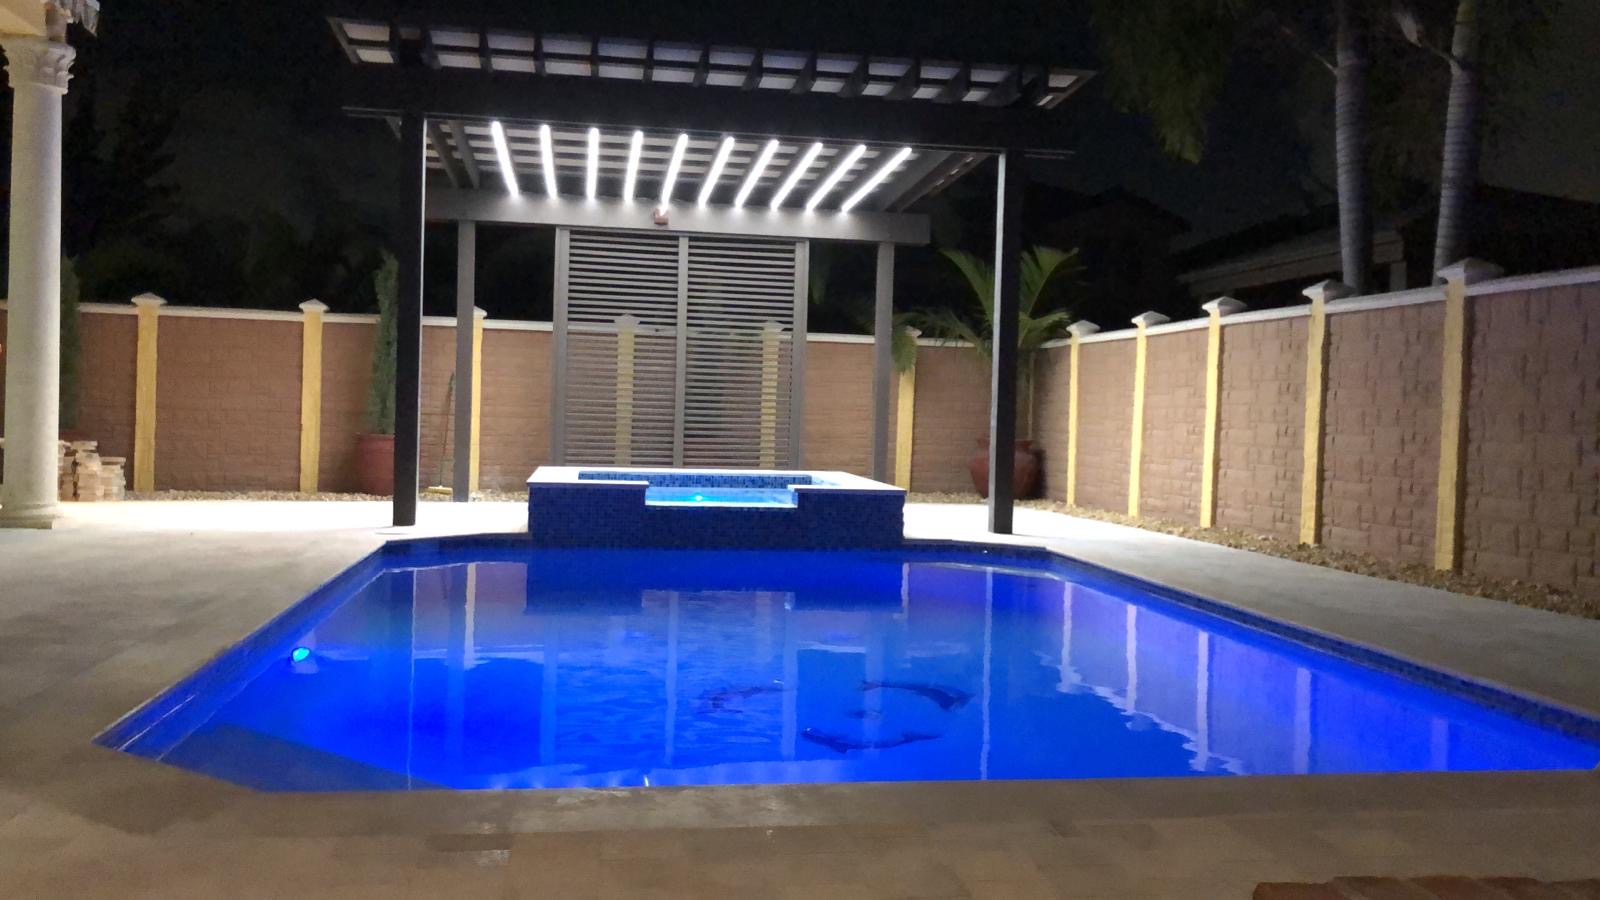 Spa, Paver, Pool remopdeling and pergola